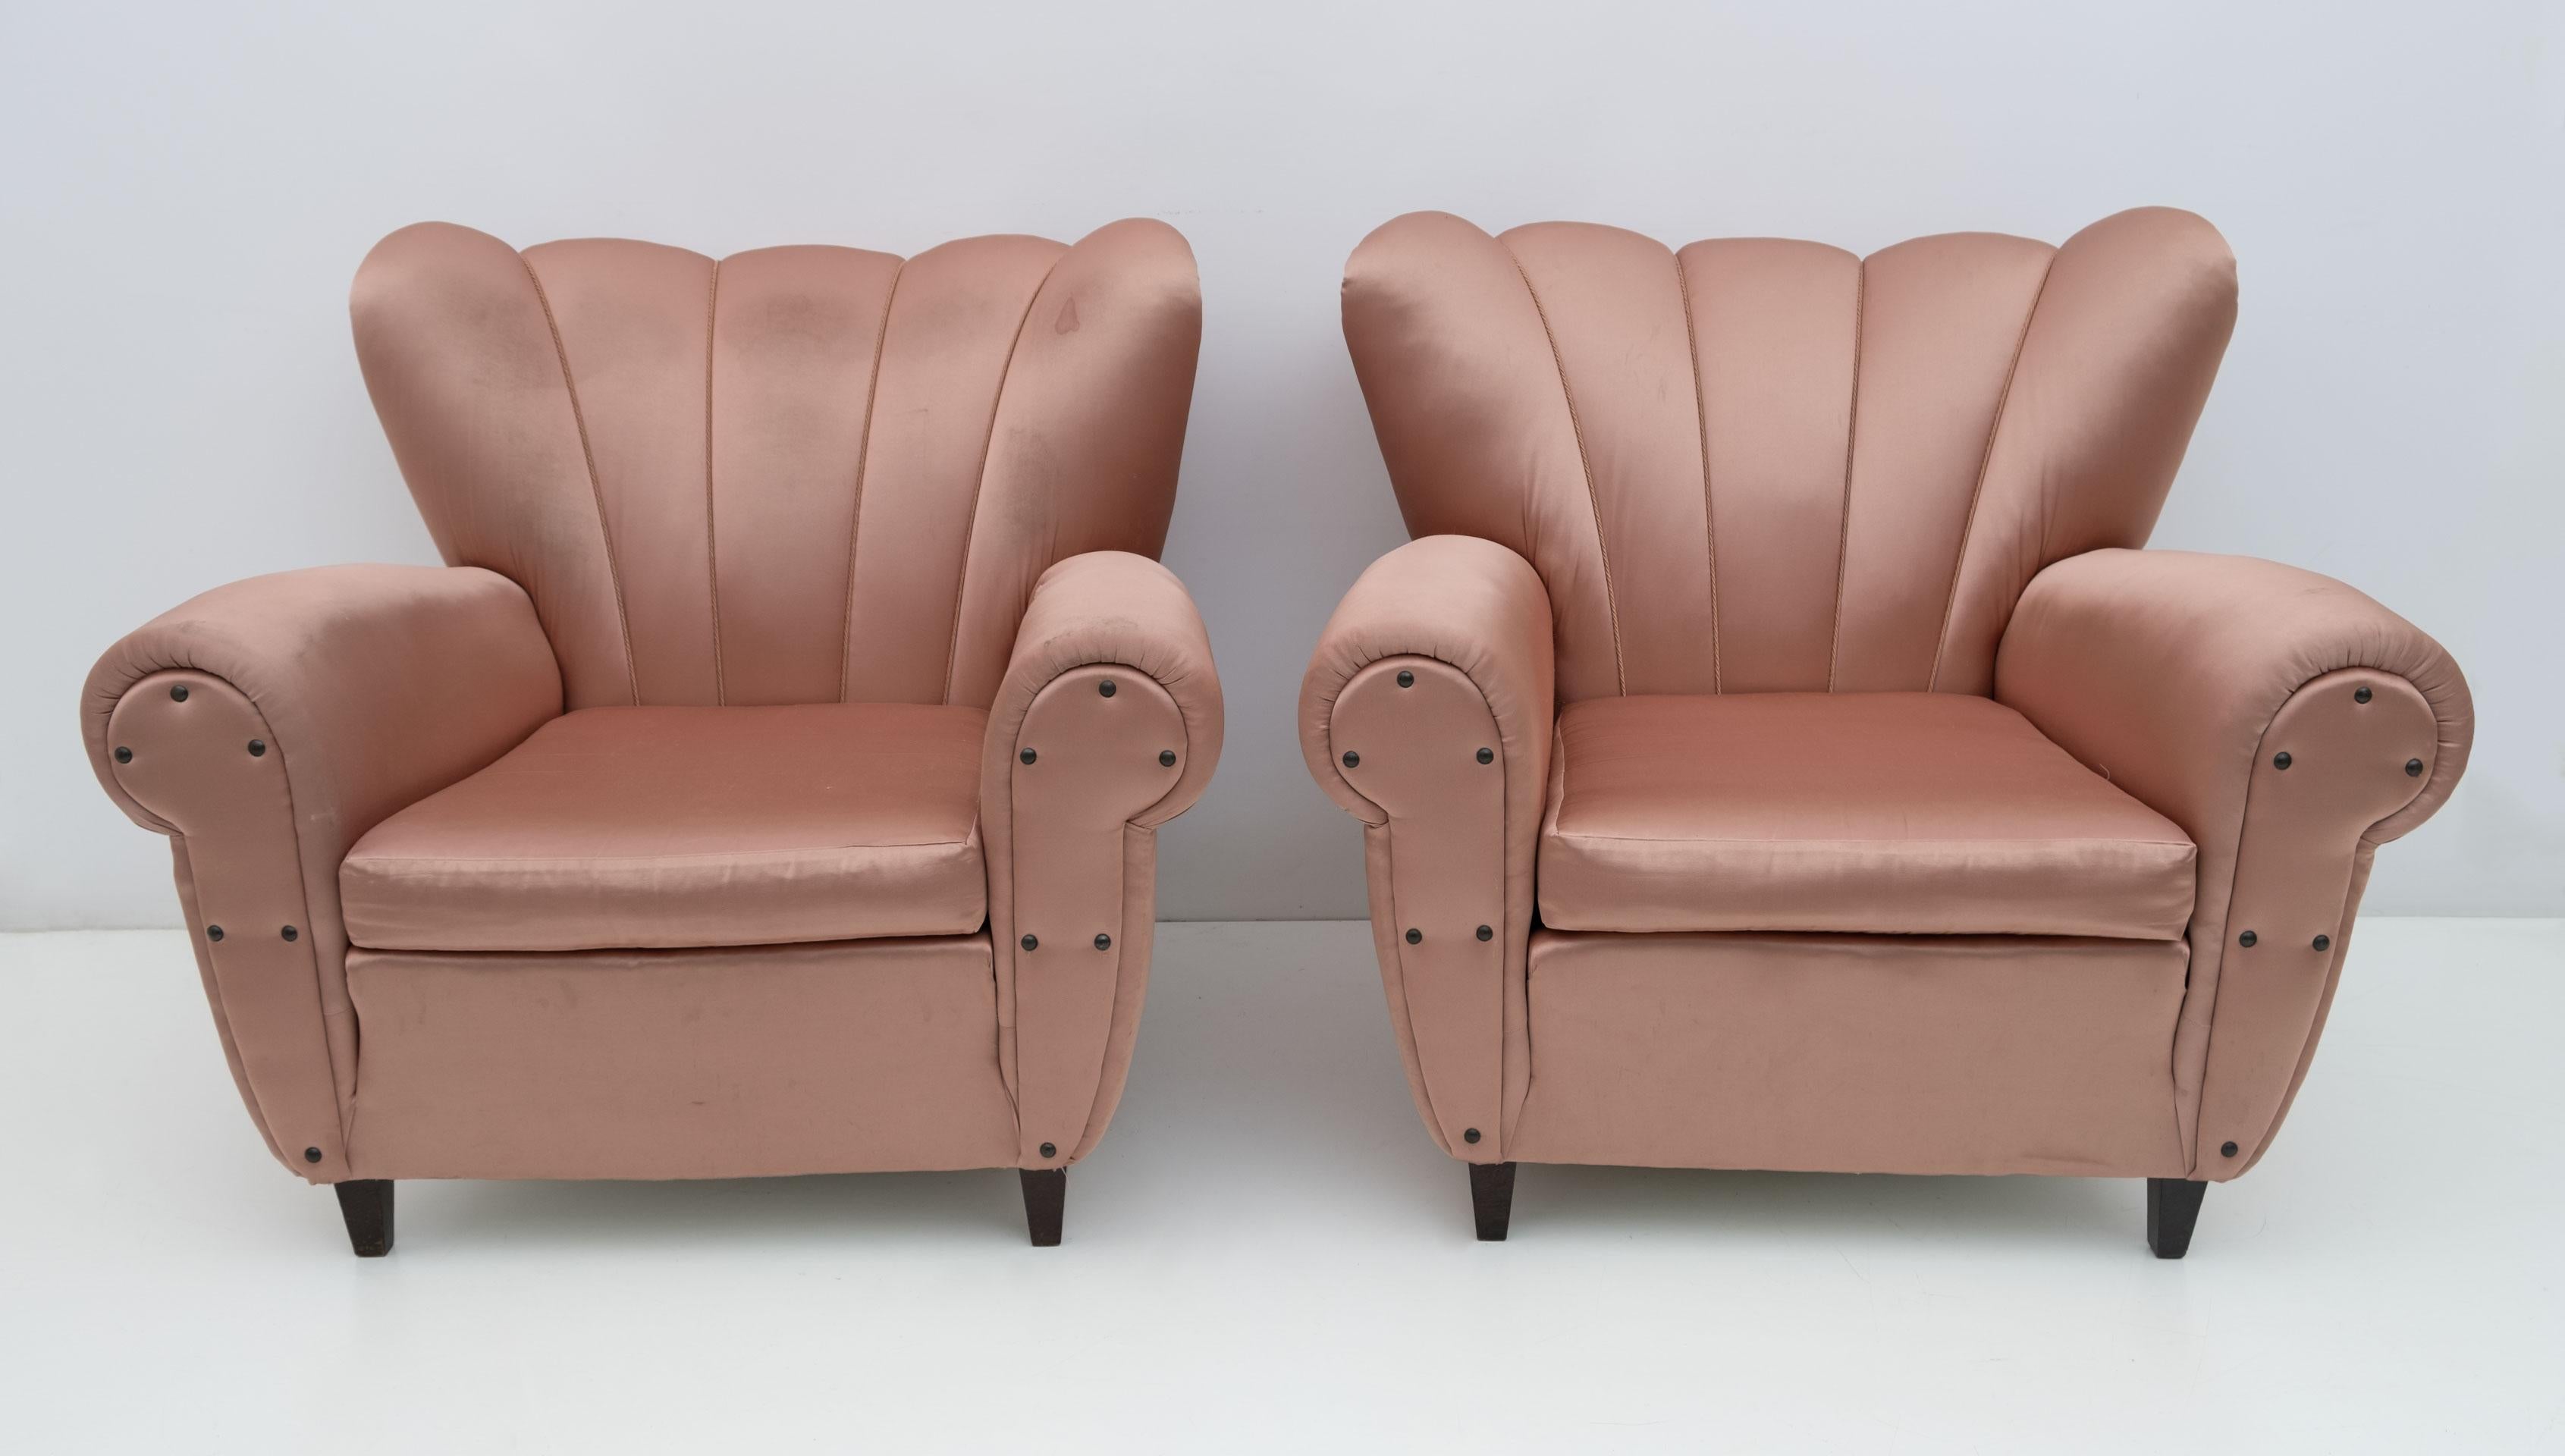 Pair of armchairs in the Ulrich style, structure and legs in solid wood, covering in satin, made in the 1950s
Conditions as shown in the photos, it is advisable to redo the upholstery.